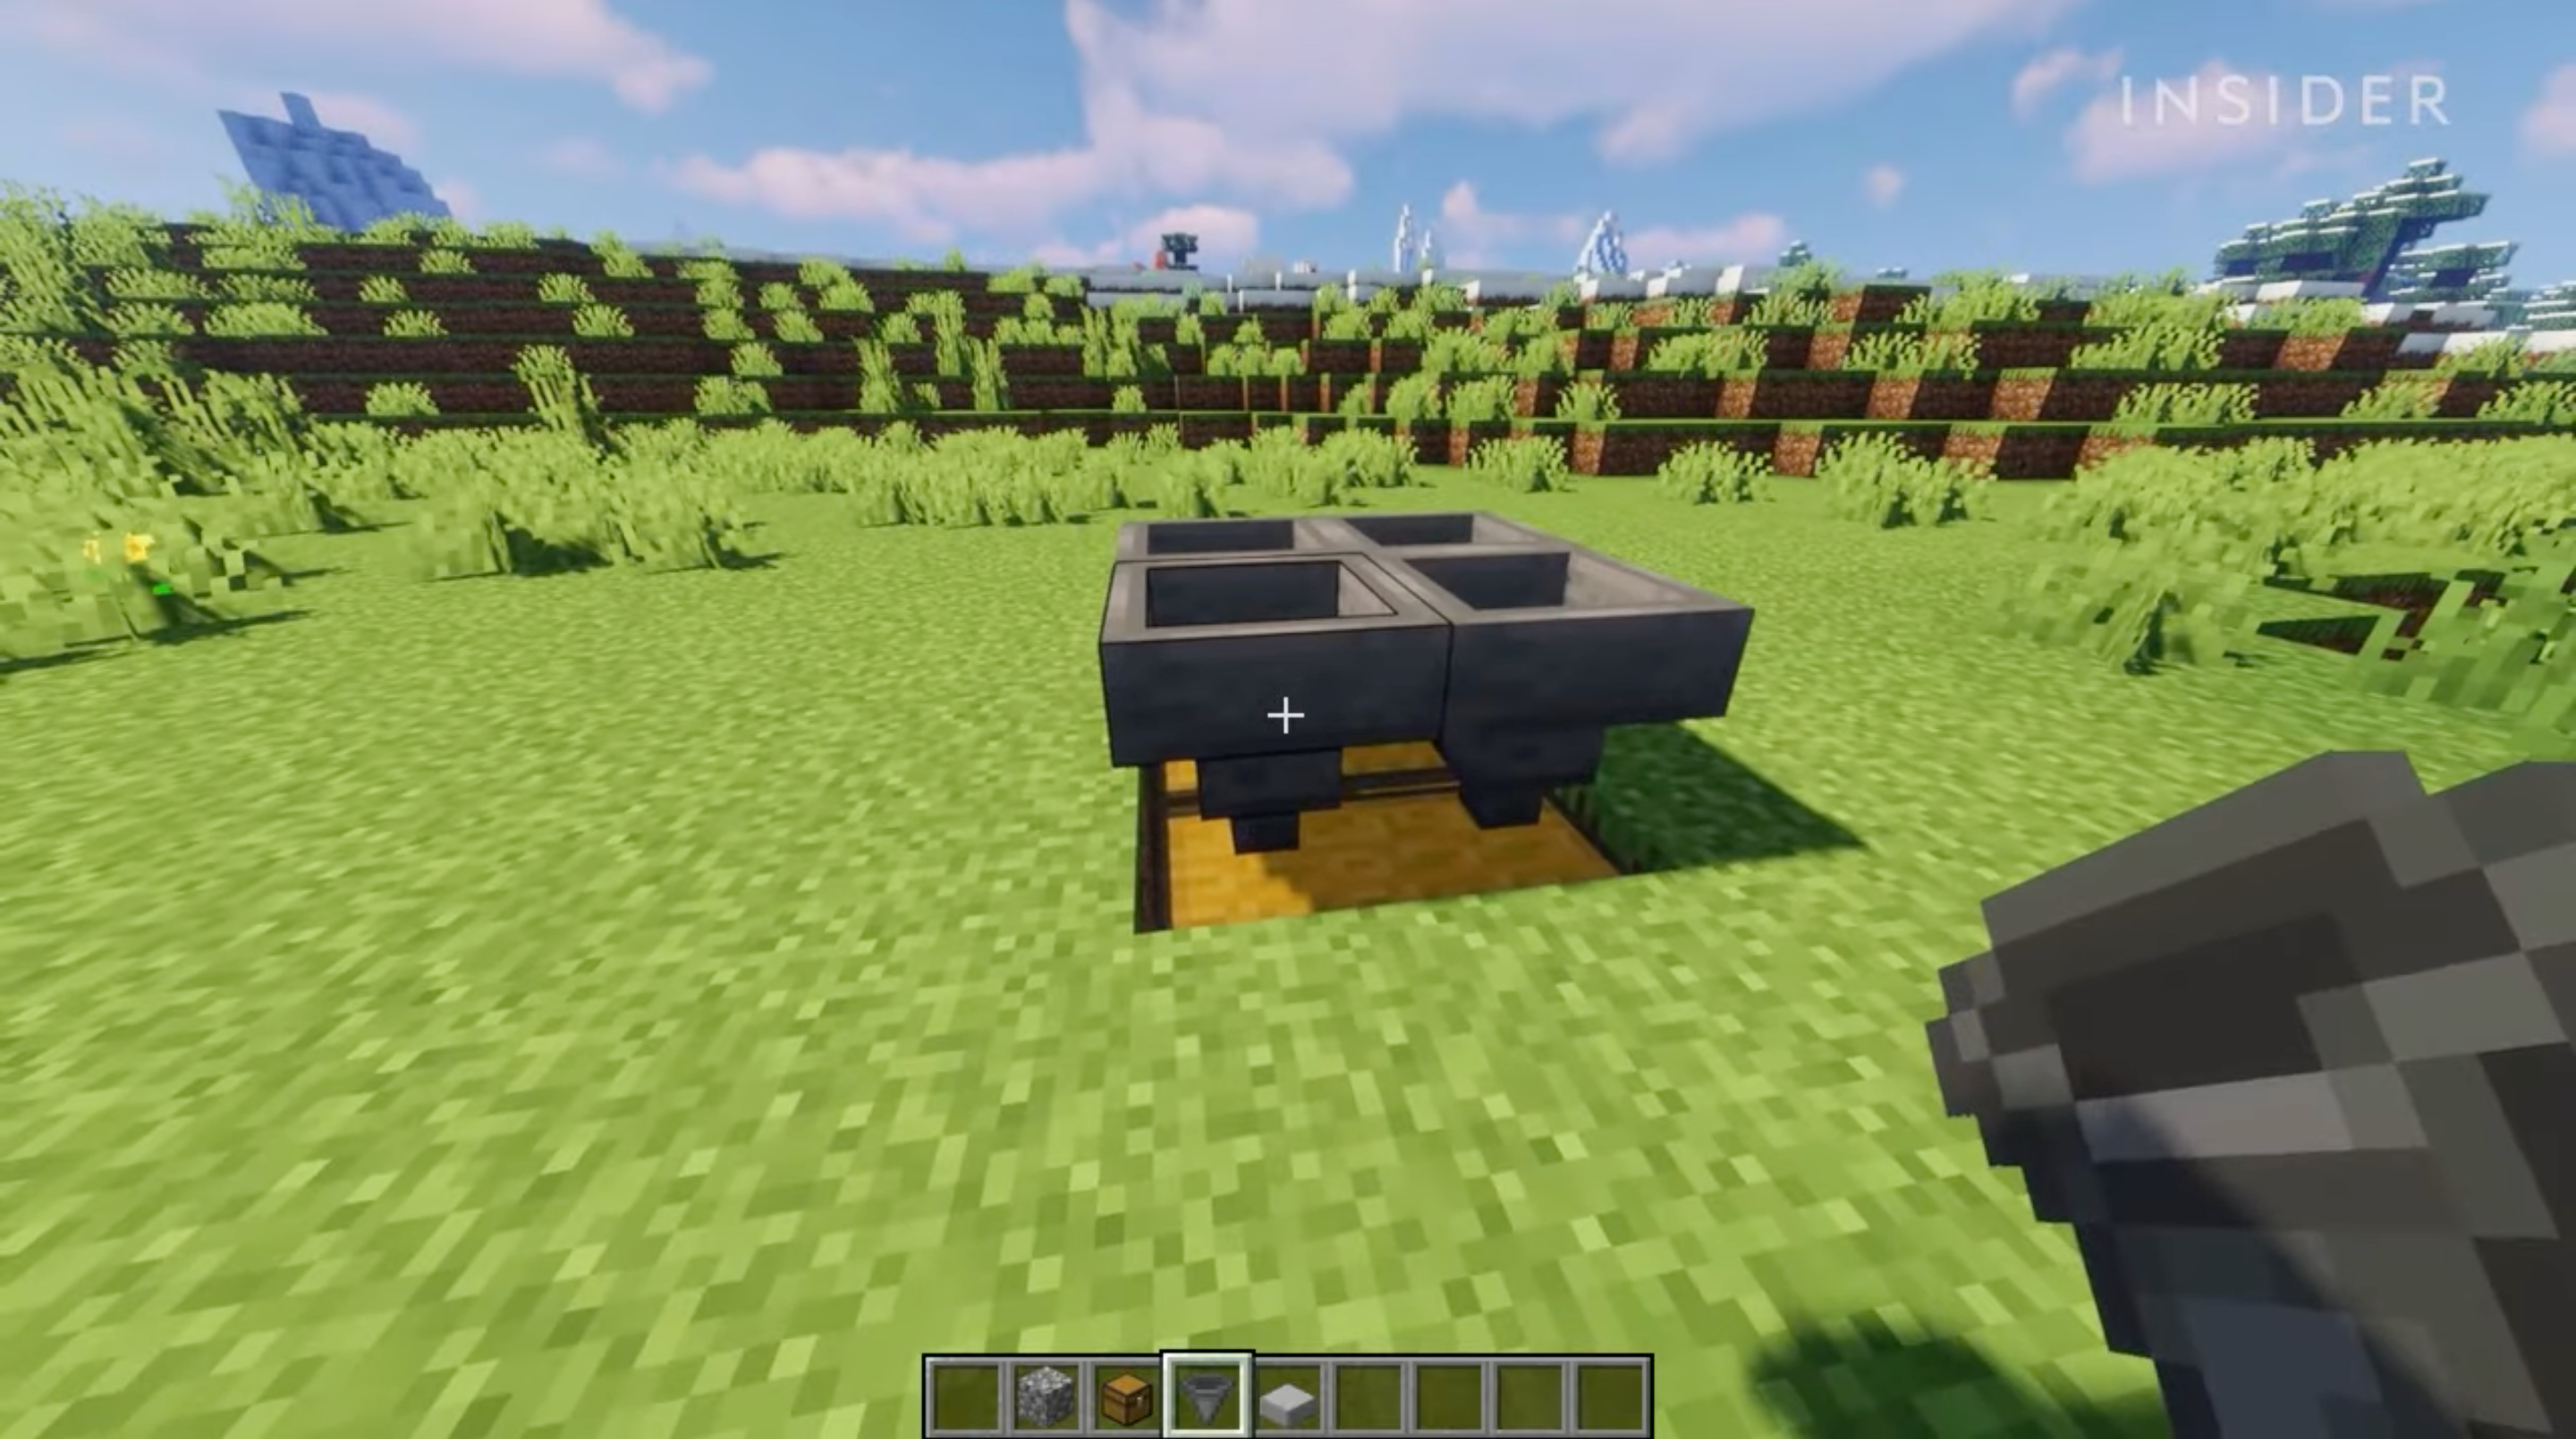 A screenshot from Minecraft, showing a hole filled with treasure chests, and hoppers on top of the chests.